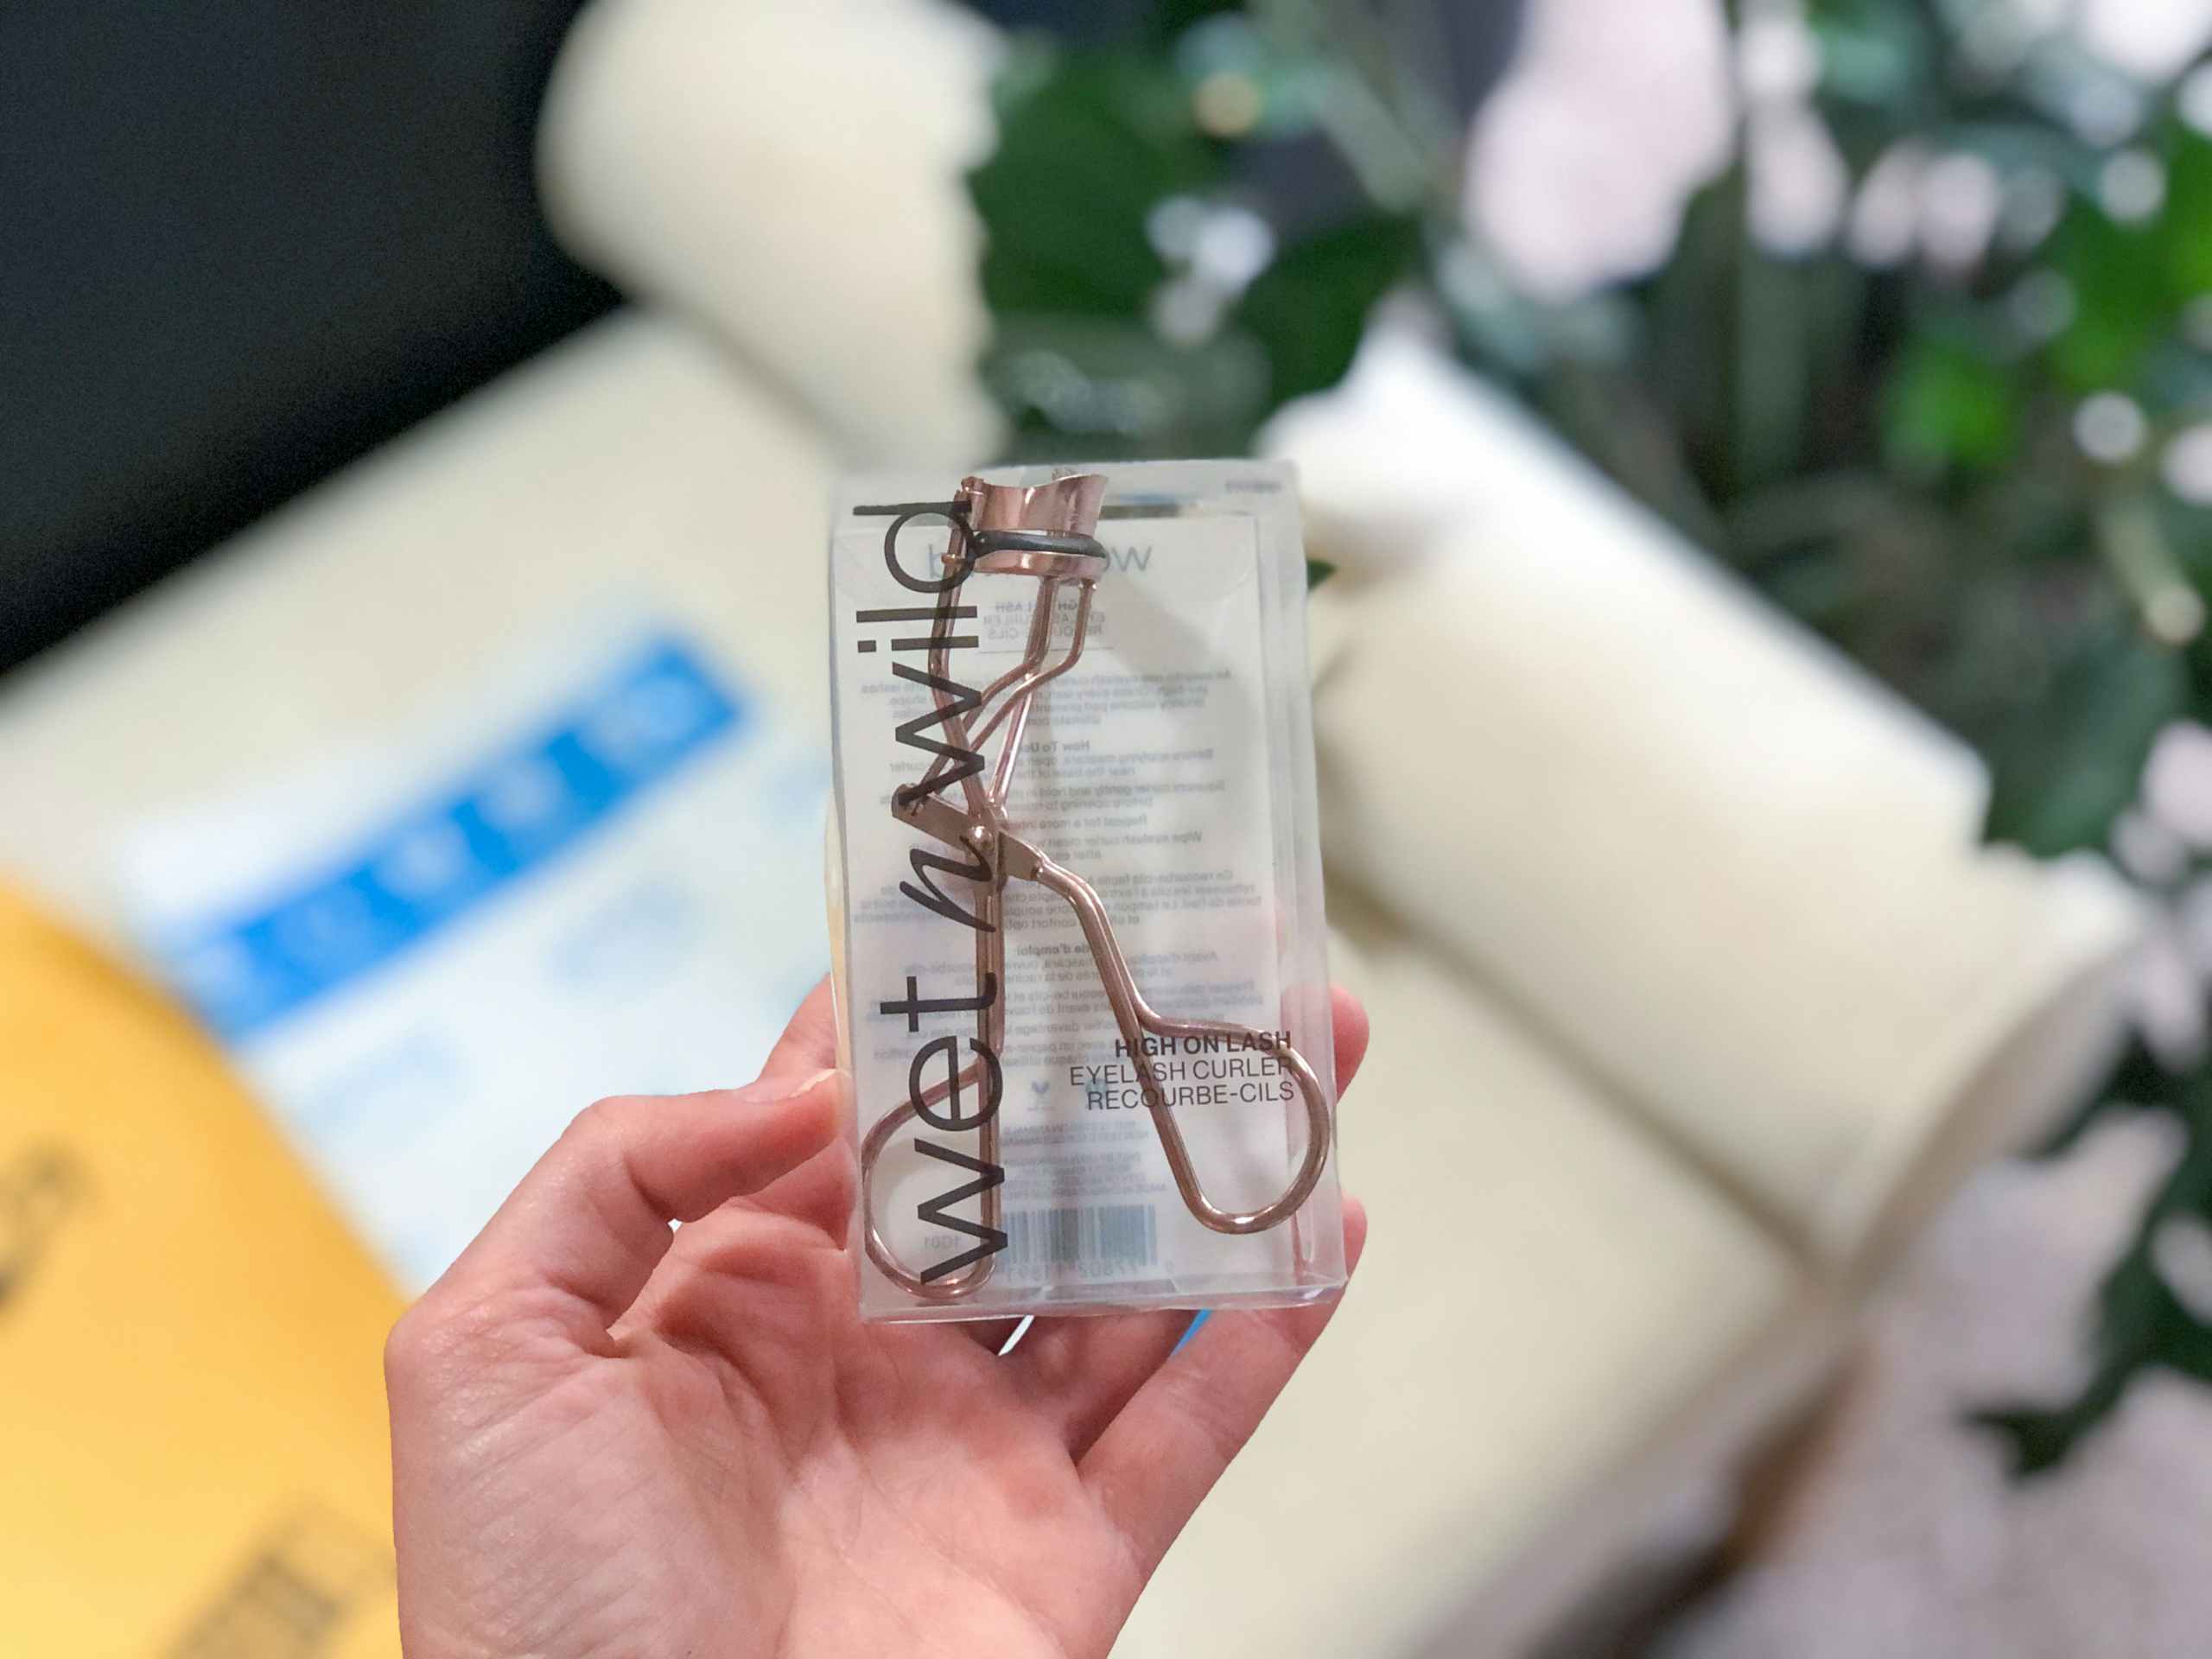 A hand holding a Wet n Wild eyelash curler in front of a delivery package.